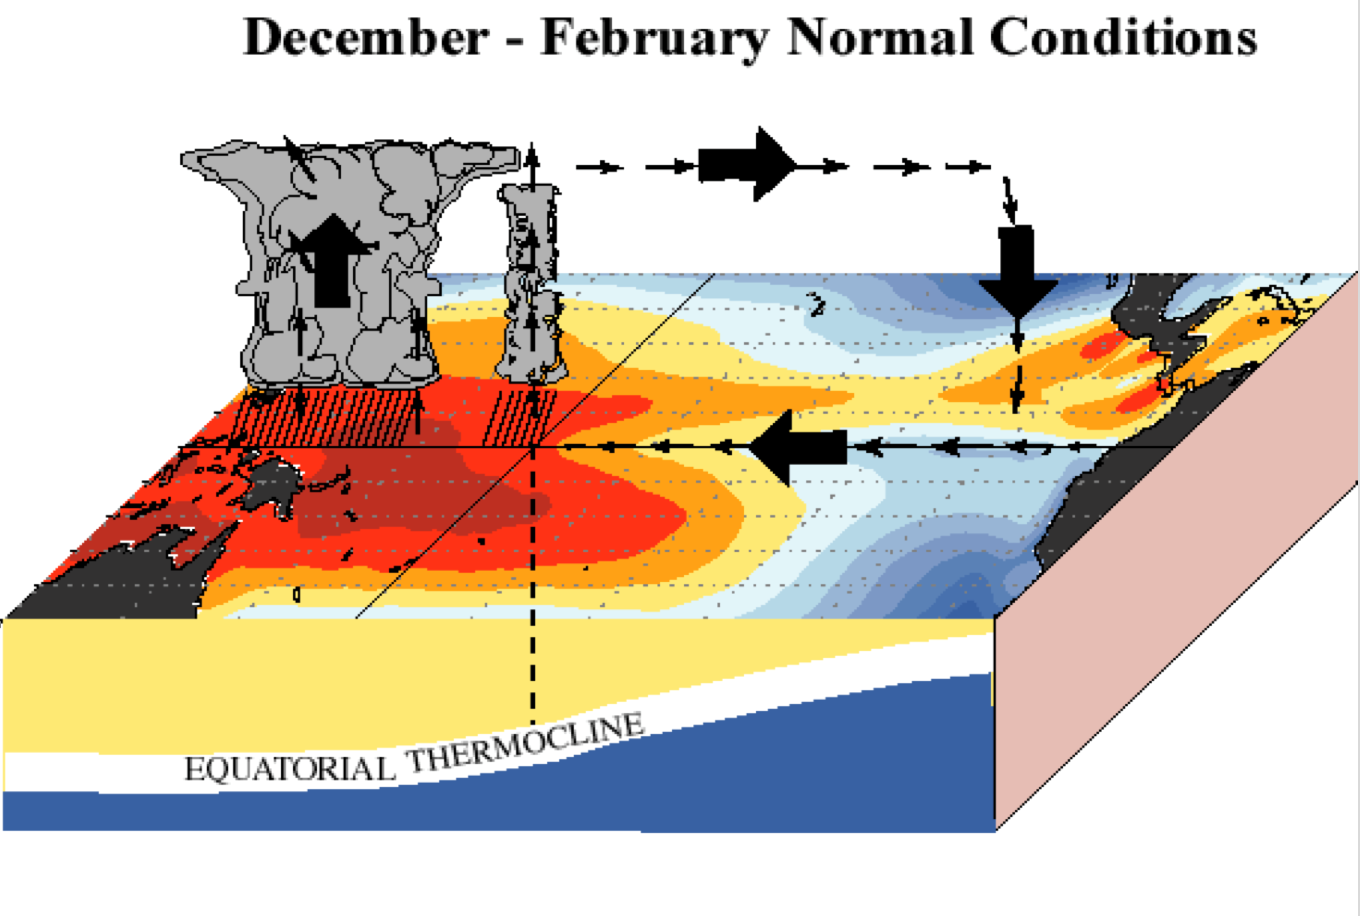 A 3-dimensional cross-section of the Pacific Ocean shows the profile of the Equatorial Thermocline under normal conditiions.